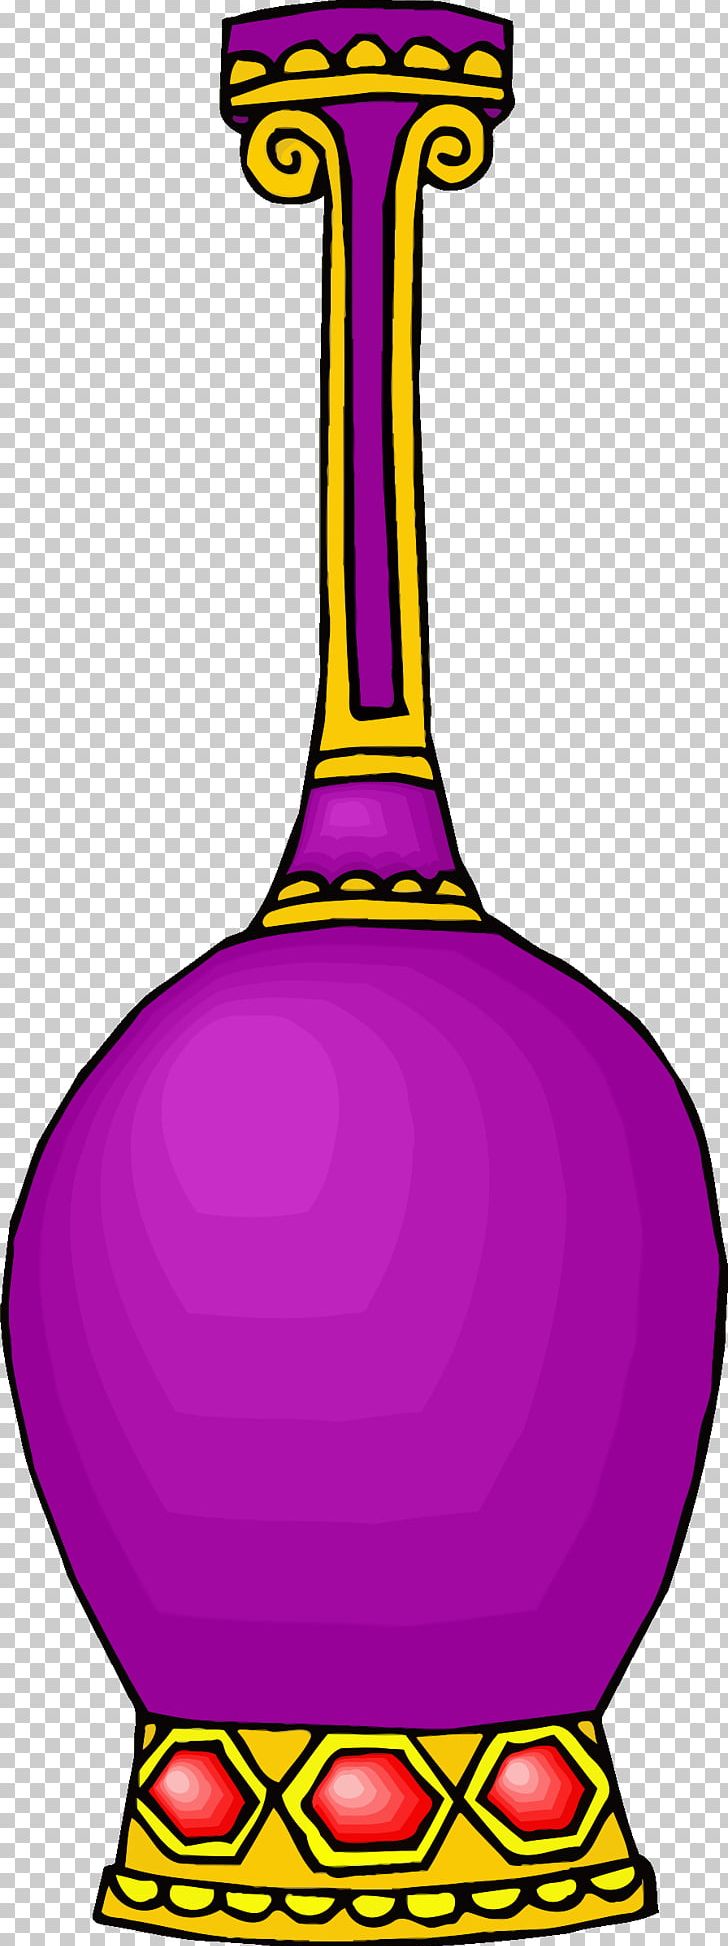 Vase PNG, Clipart, Artwork, Cartoon, Decorative Arts, Drawing, Flowers Free PNG Download